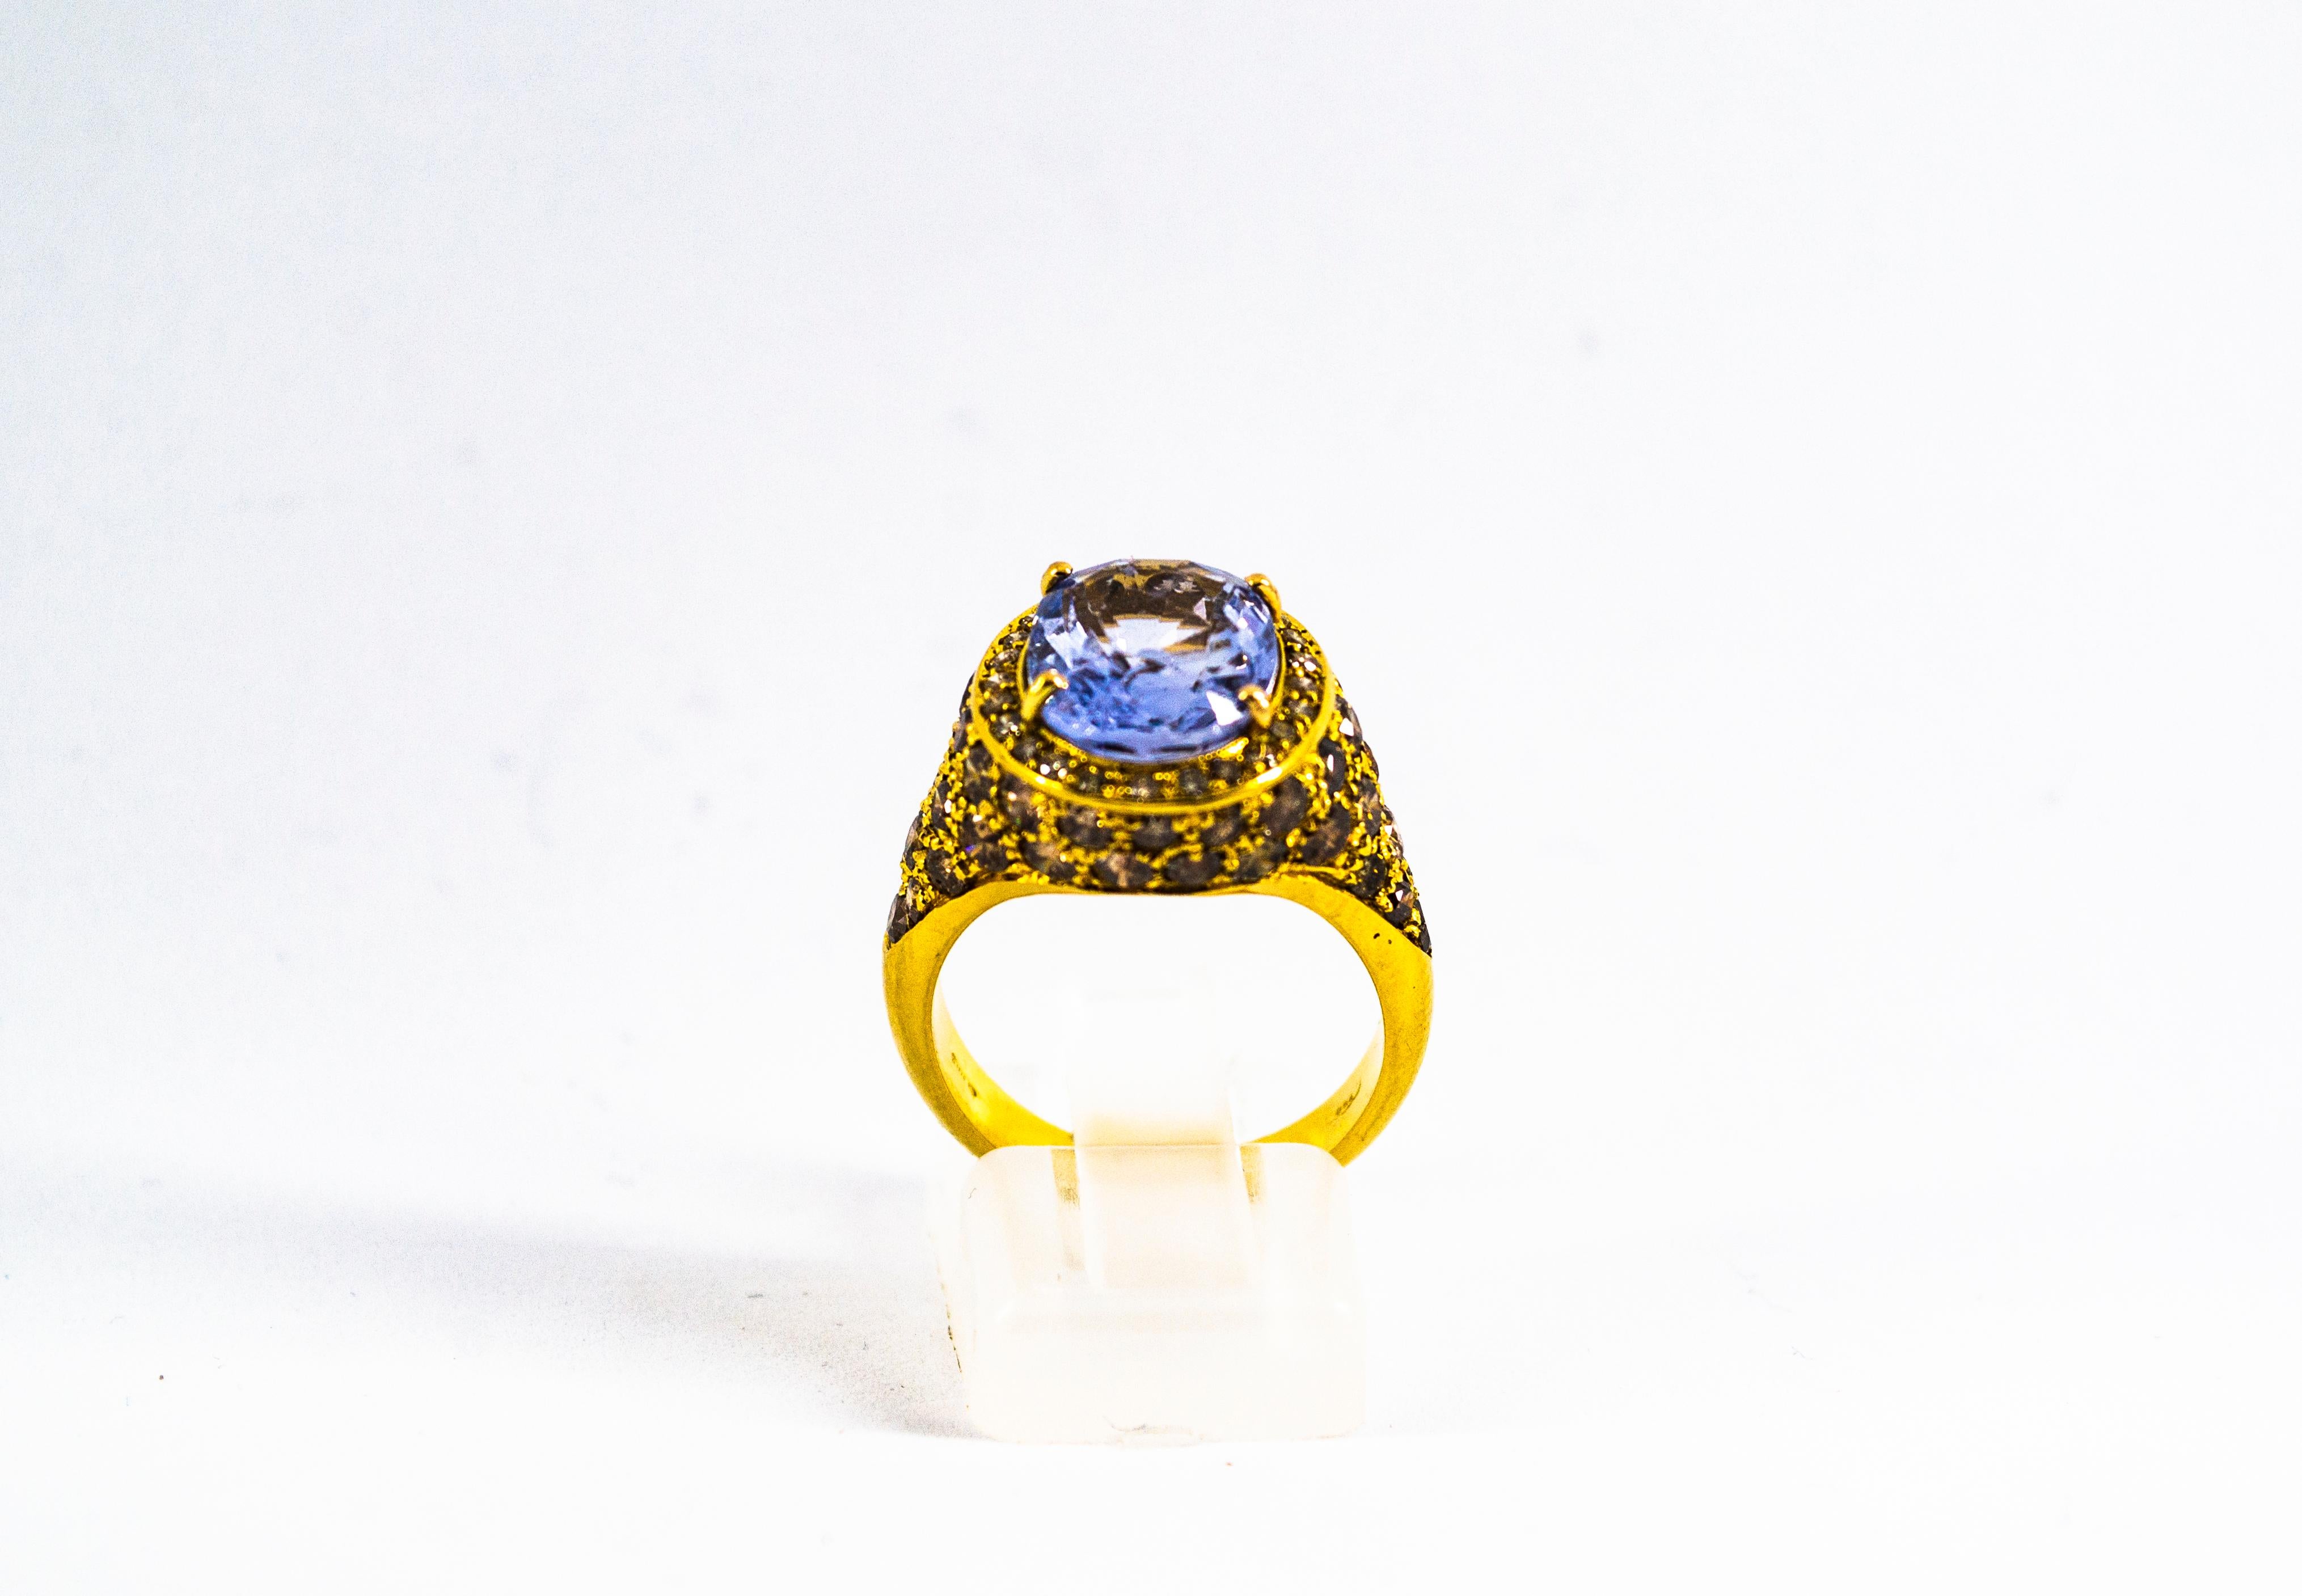 This Ring is made of 18K Yellow Gold.
This Ring has 2.80 Carats of Brown Modern Round Cut Diamonds.
This Ring has a 5.46 Carats Blue Oval Cut Sapphire.
This Ring is available also with a central Emerald.
Size ITA: 13 USA: 6.5
We're a workshop so